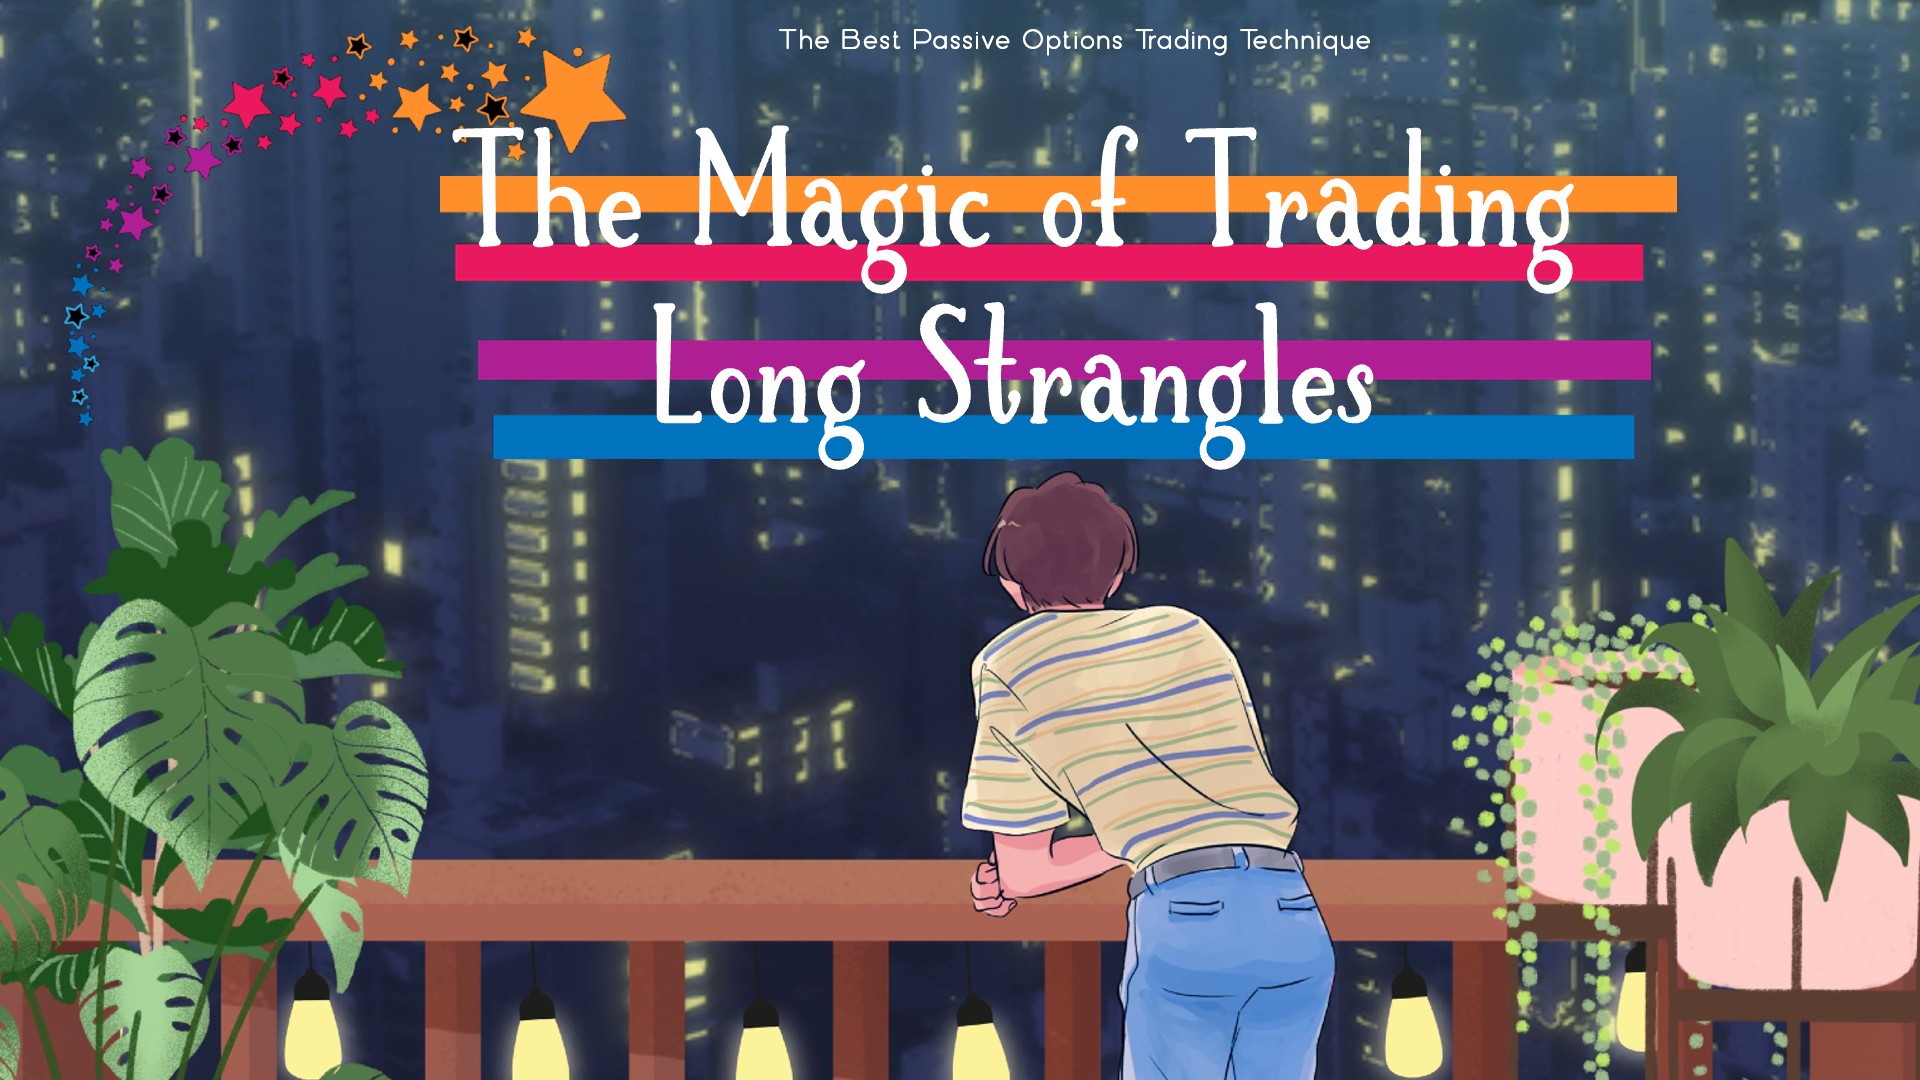 The Magic of Trading Long Strangles: The Best Passive Options Trading Technique